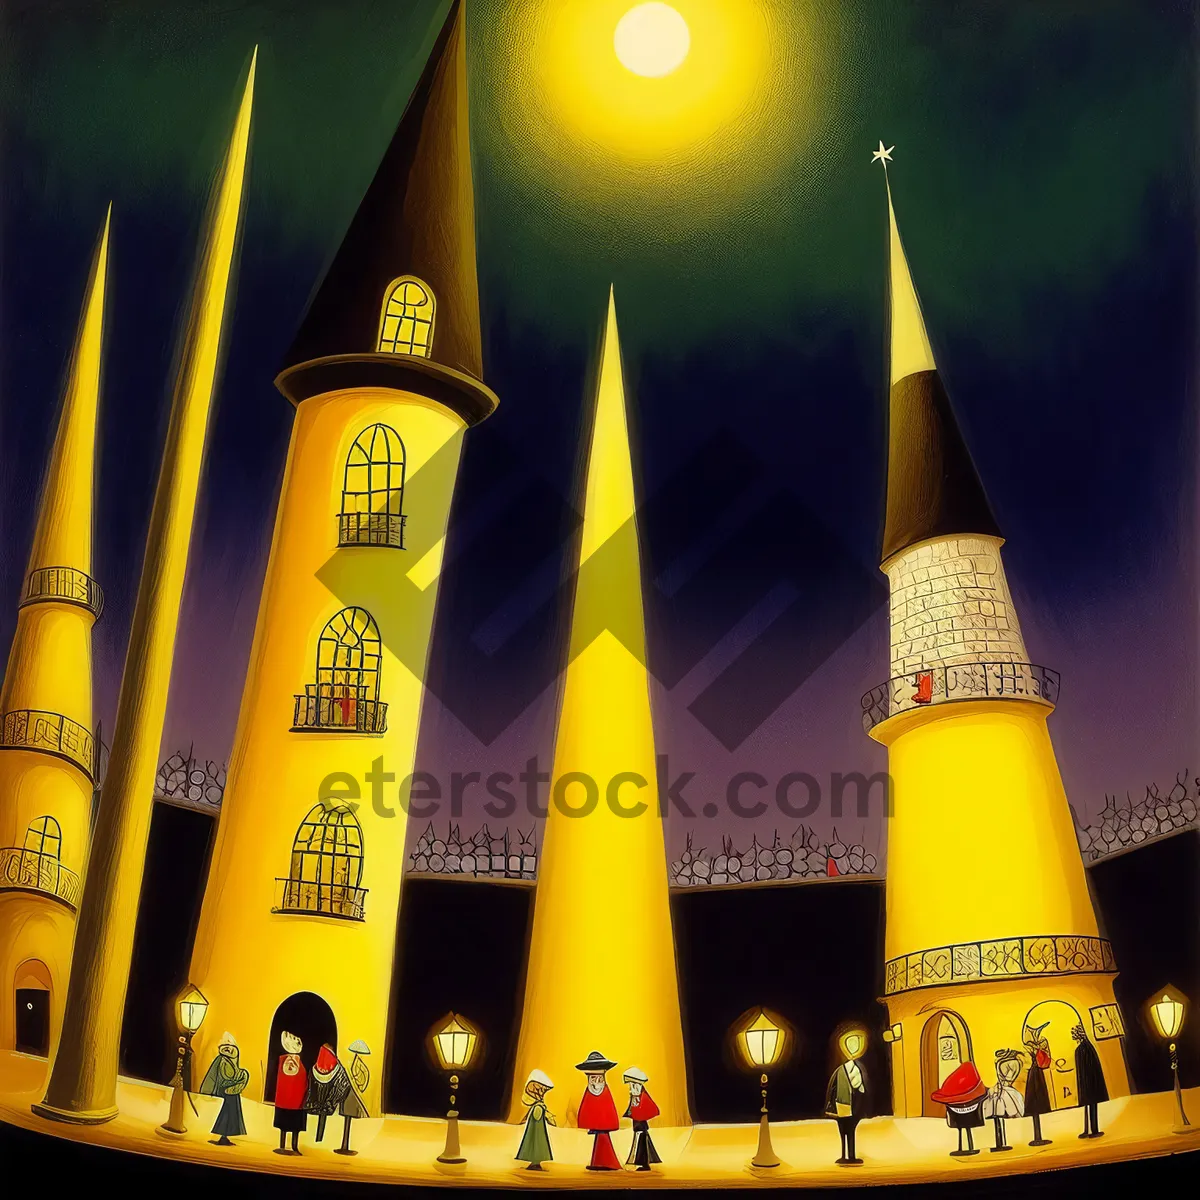 Picture of Iconic City Cathedral Under Starry Sky"
"Historic Tower Amidst Charming Town"
"Gorgeous Cathedral with Towering Dome"
"Charming Wine Bottle Church in City"
"Old Monument: Architectural Marvel at Night